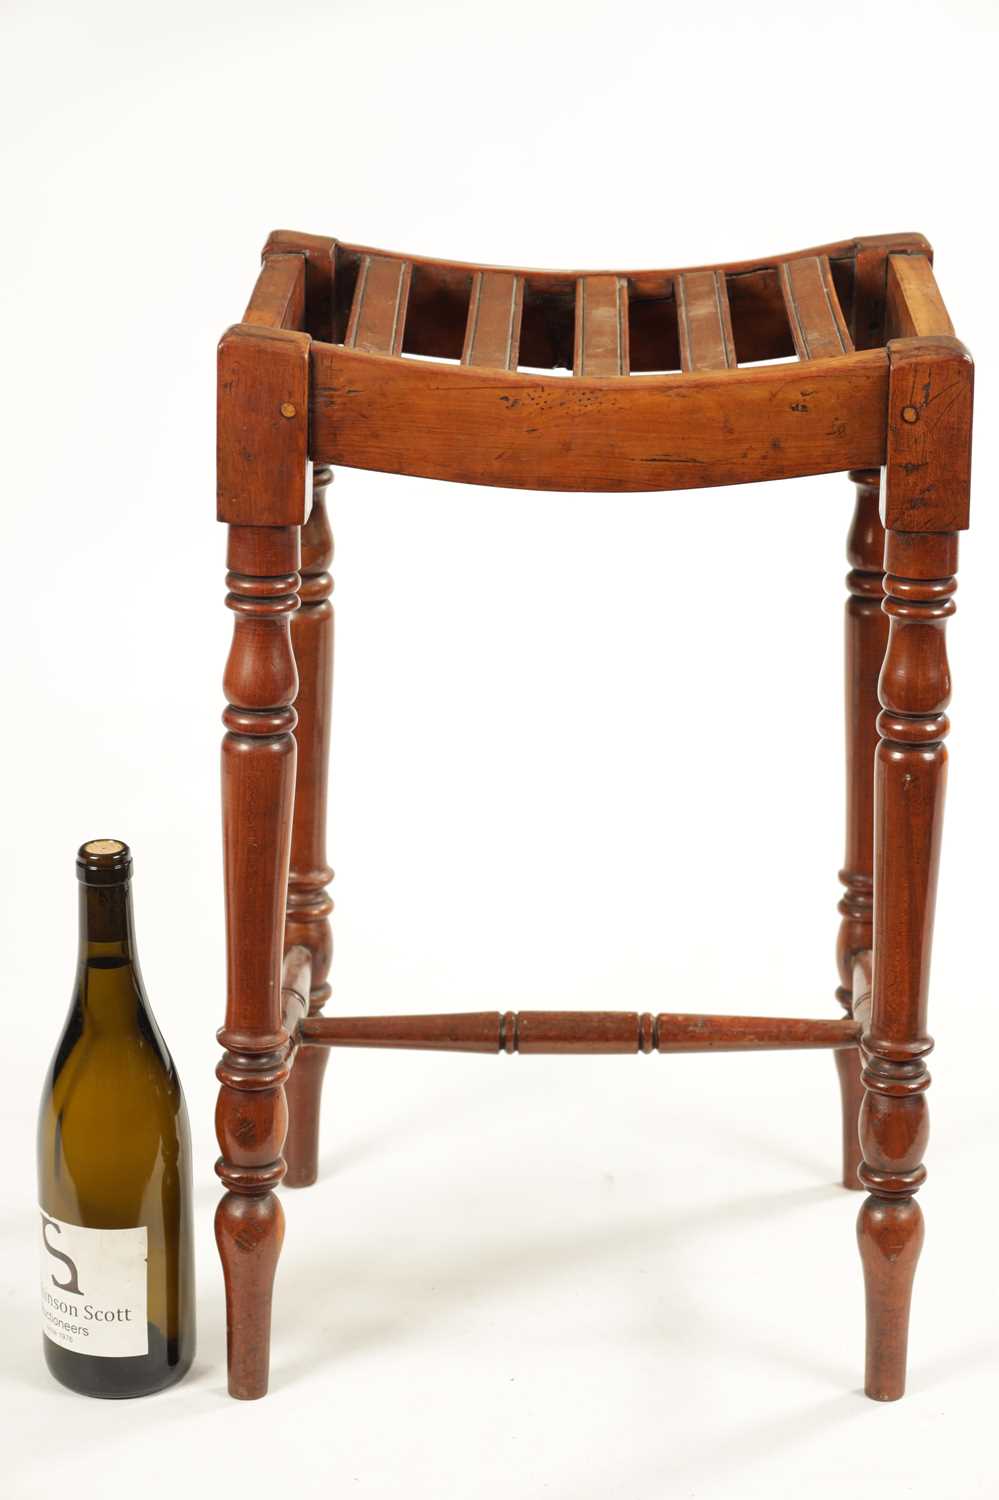 A RARE REGENCY YEW WOOD SLATTED TOP STOOL - Image 4 of 6